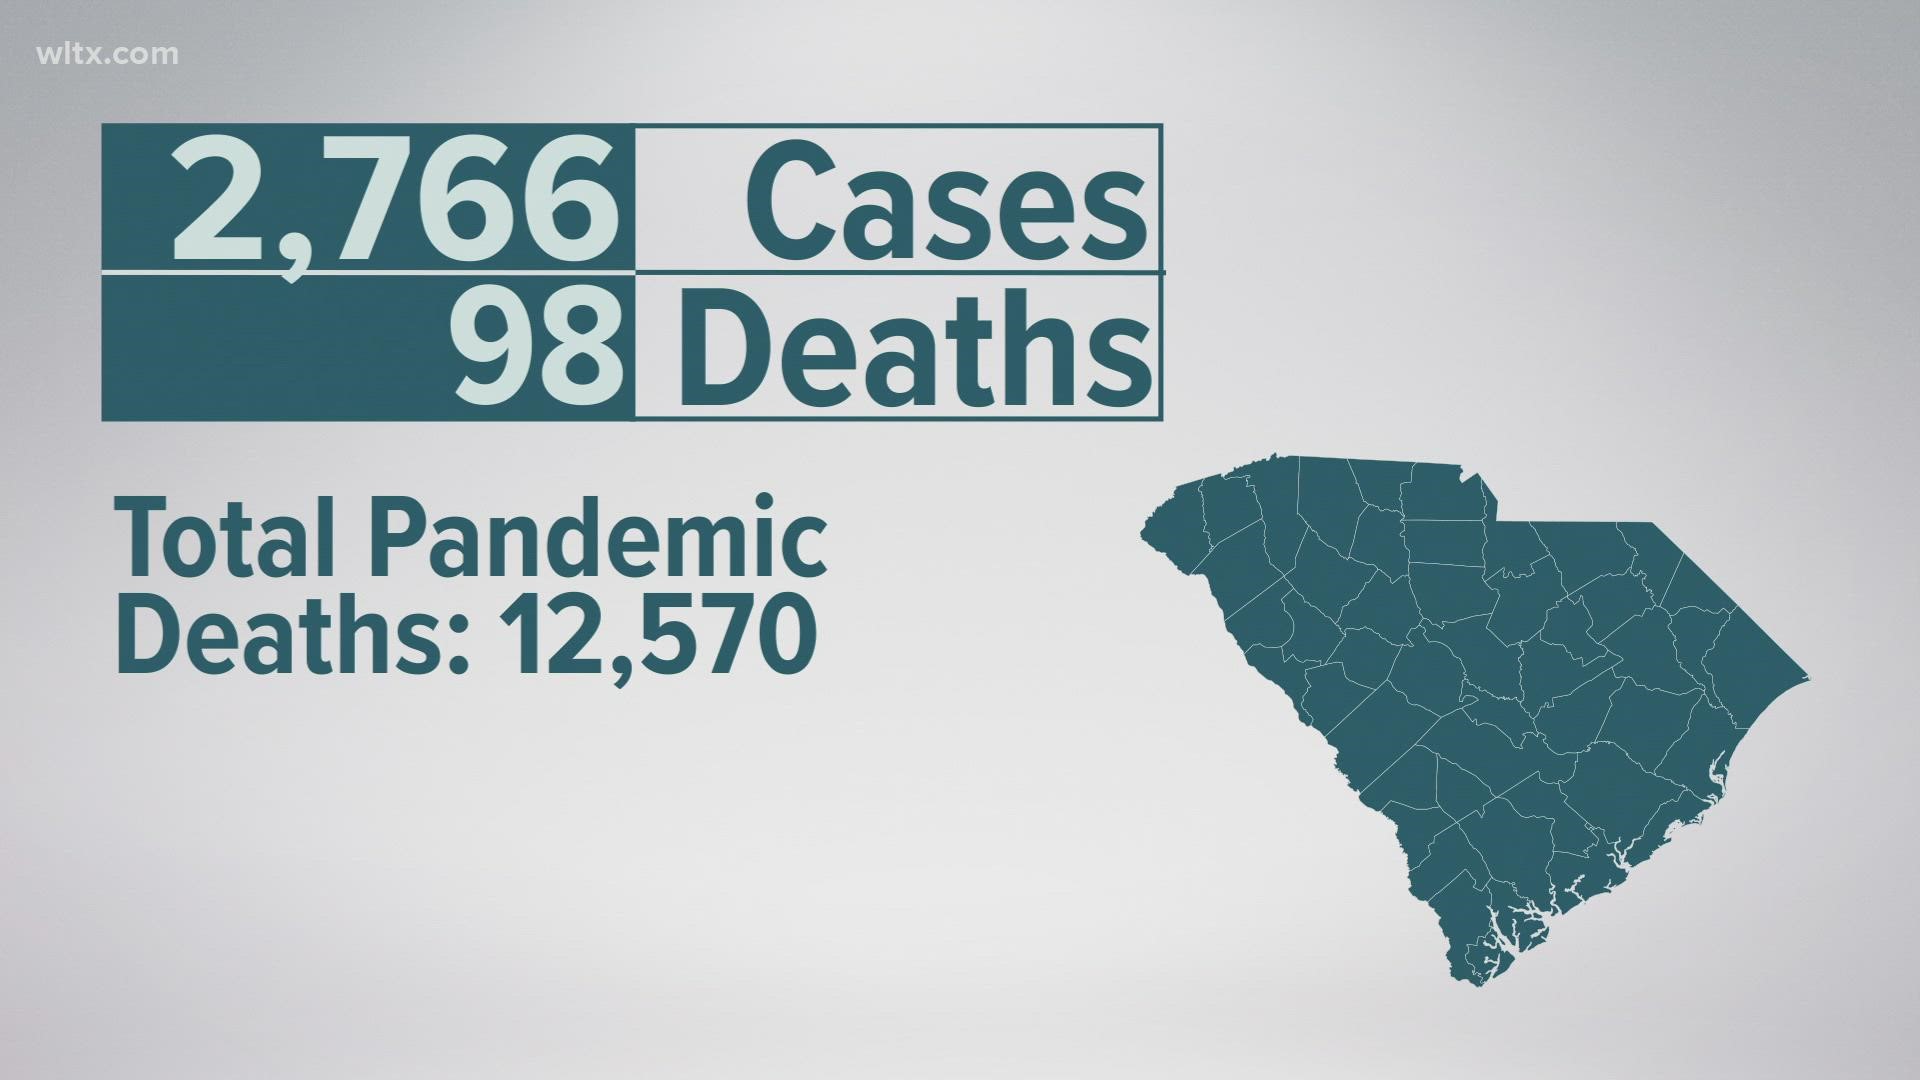 The health agency reported 2,766 new cases across the state today along with 98 deaths.